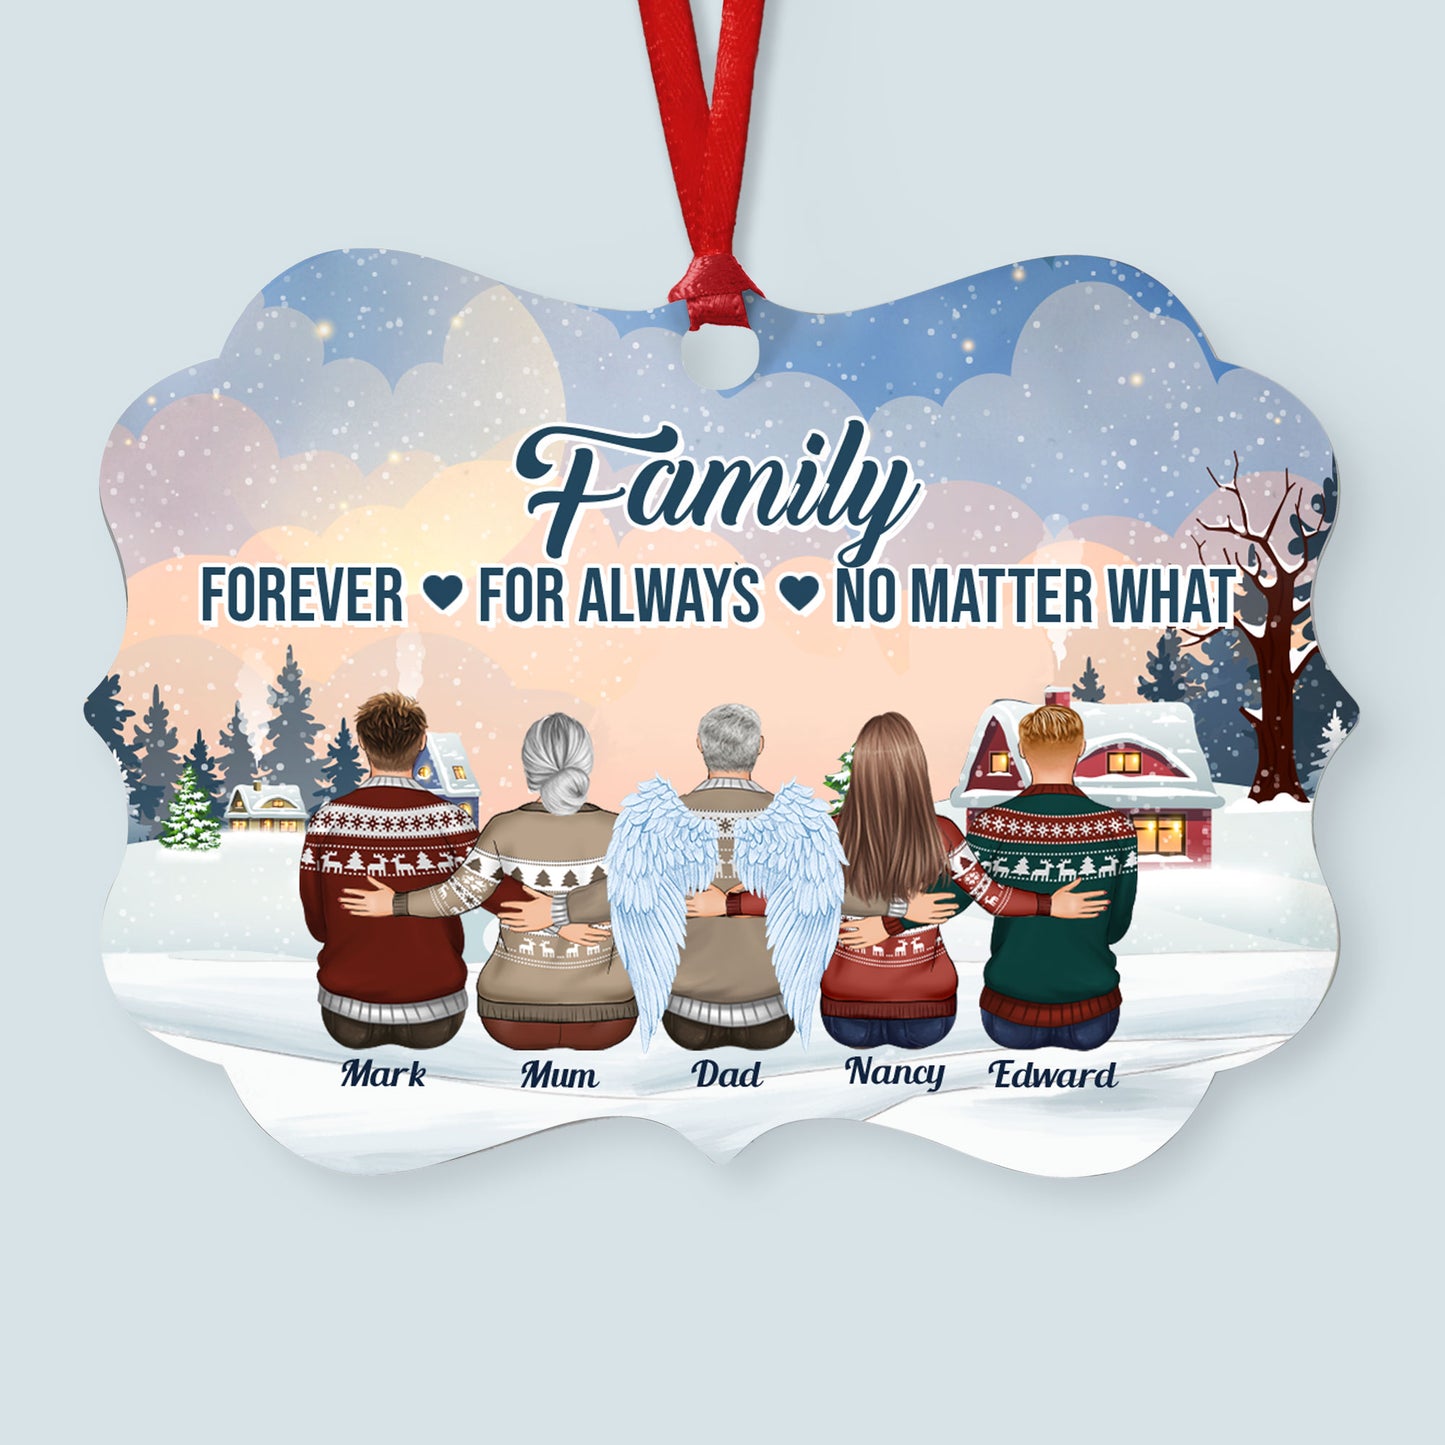 Family Forever For Always No Matter What - Personalized Aluminum Ornament - Christmas Gift Family Ornament For Mom, Dad, Siblings - Family Hugging